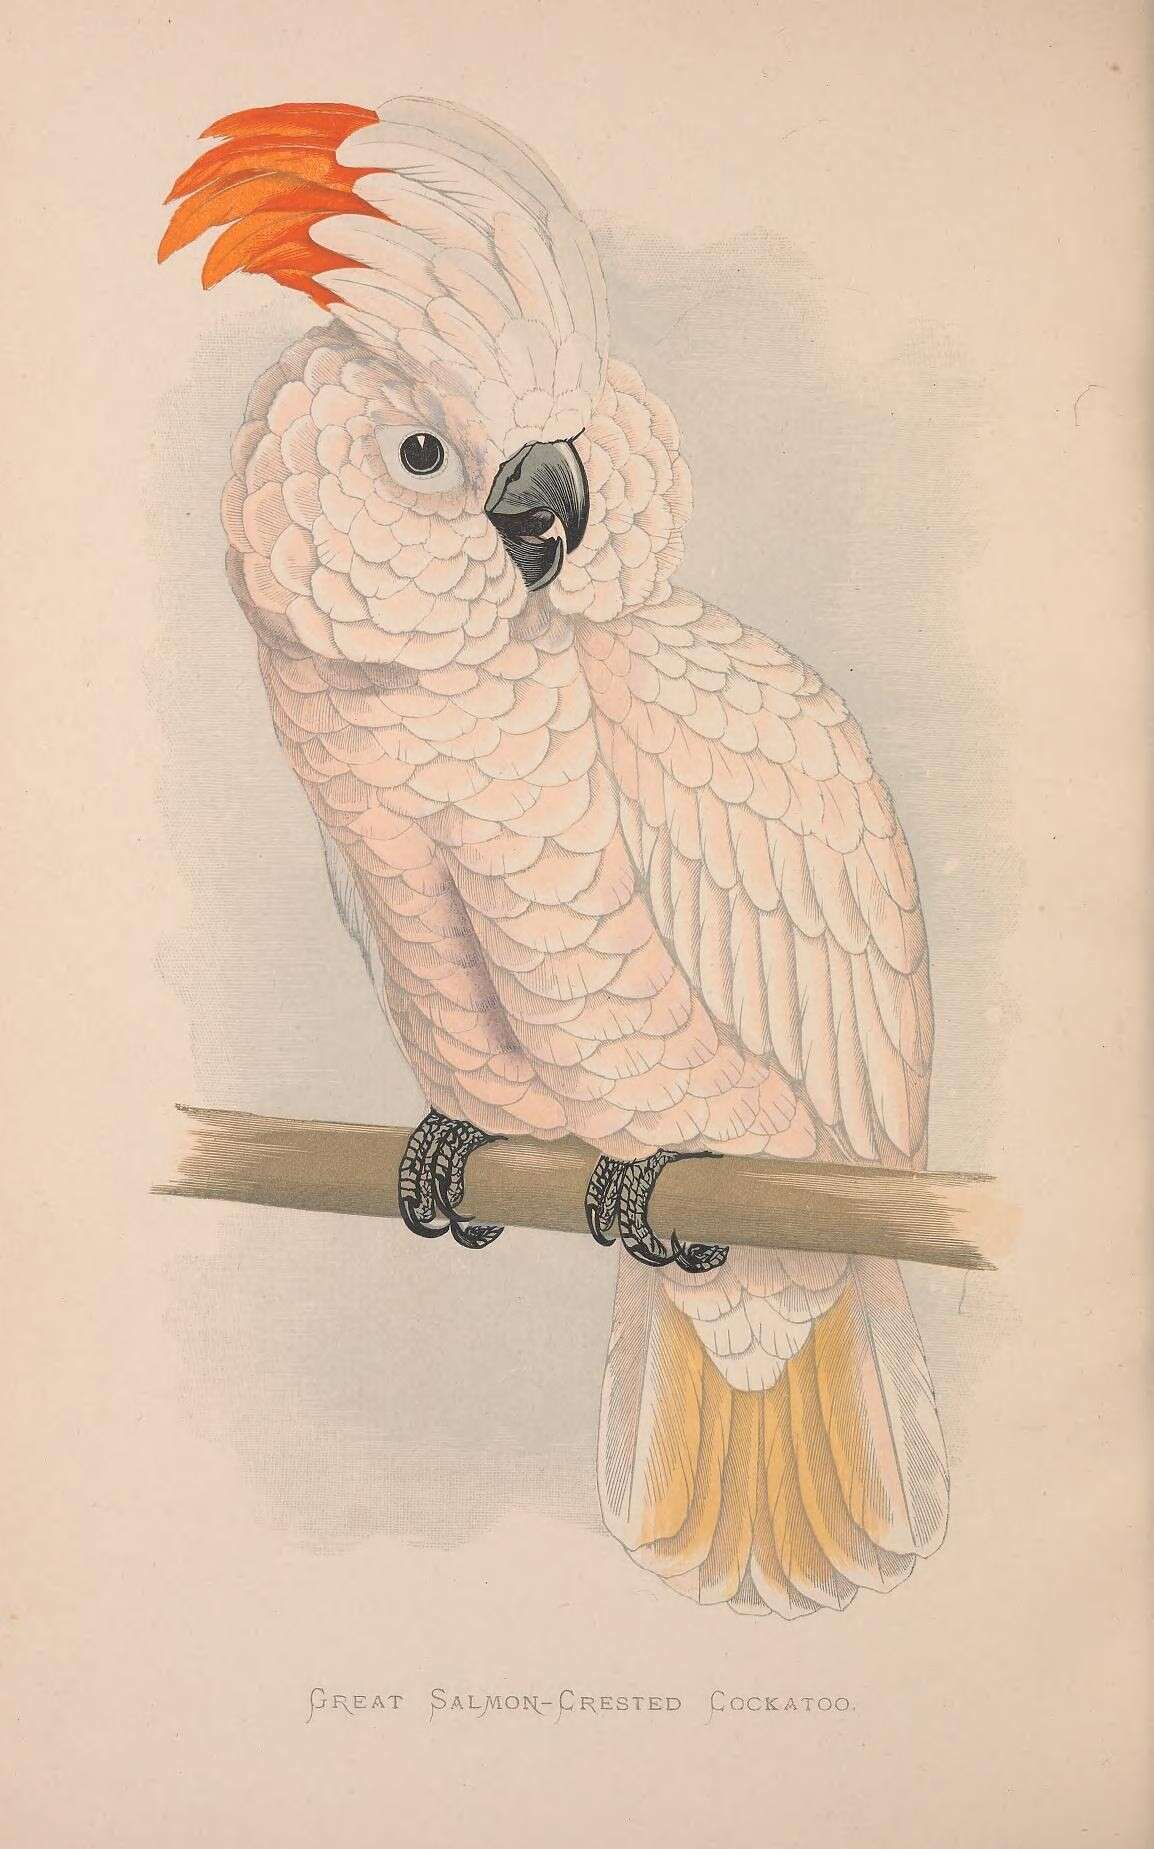 Image of Moluccan Cockatoo